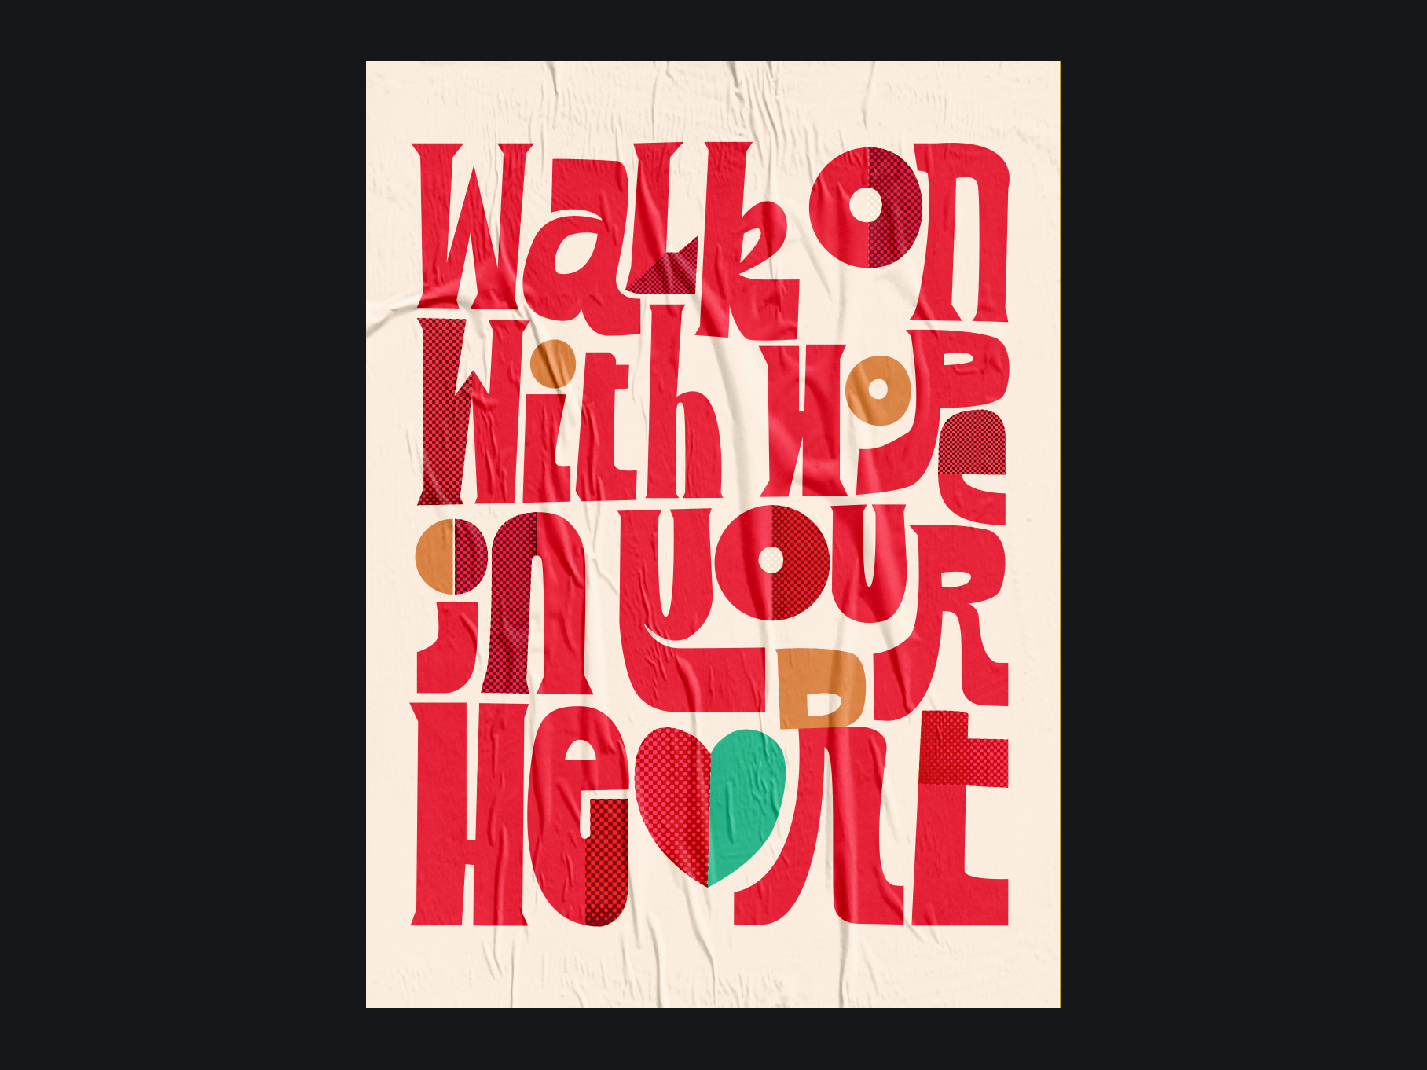 Walk On football futbol illustration inspiration lettering liverpool liverpool fc poster poster art poster collection premier league soccer sports typogaphy typography design ynwa